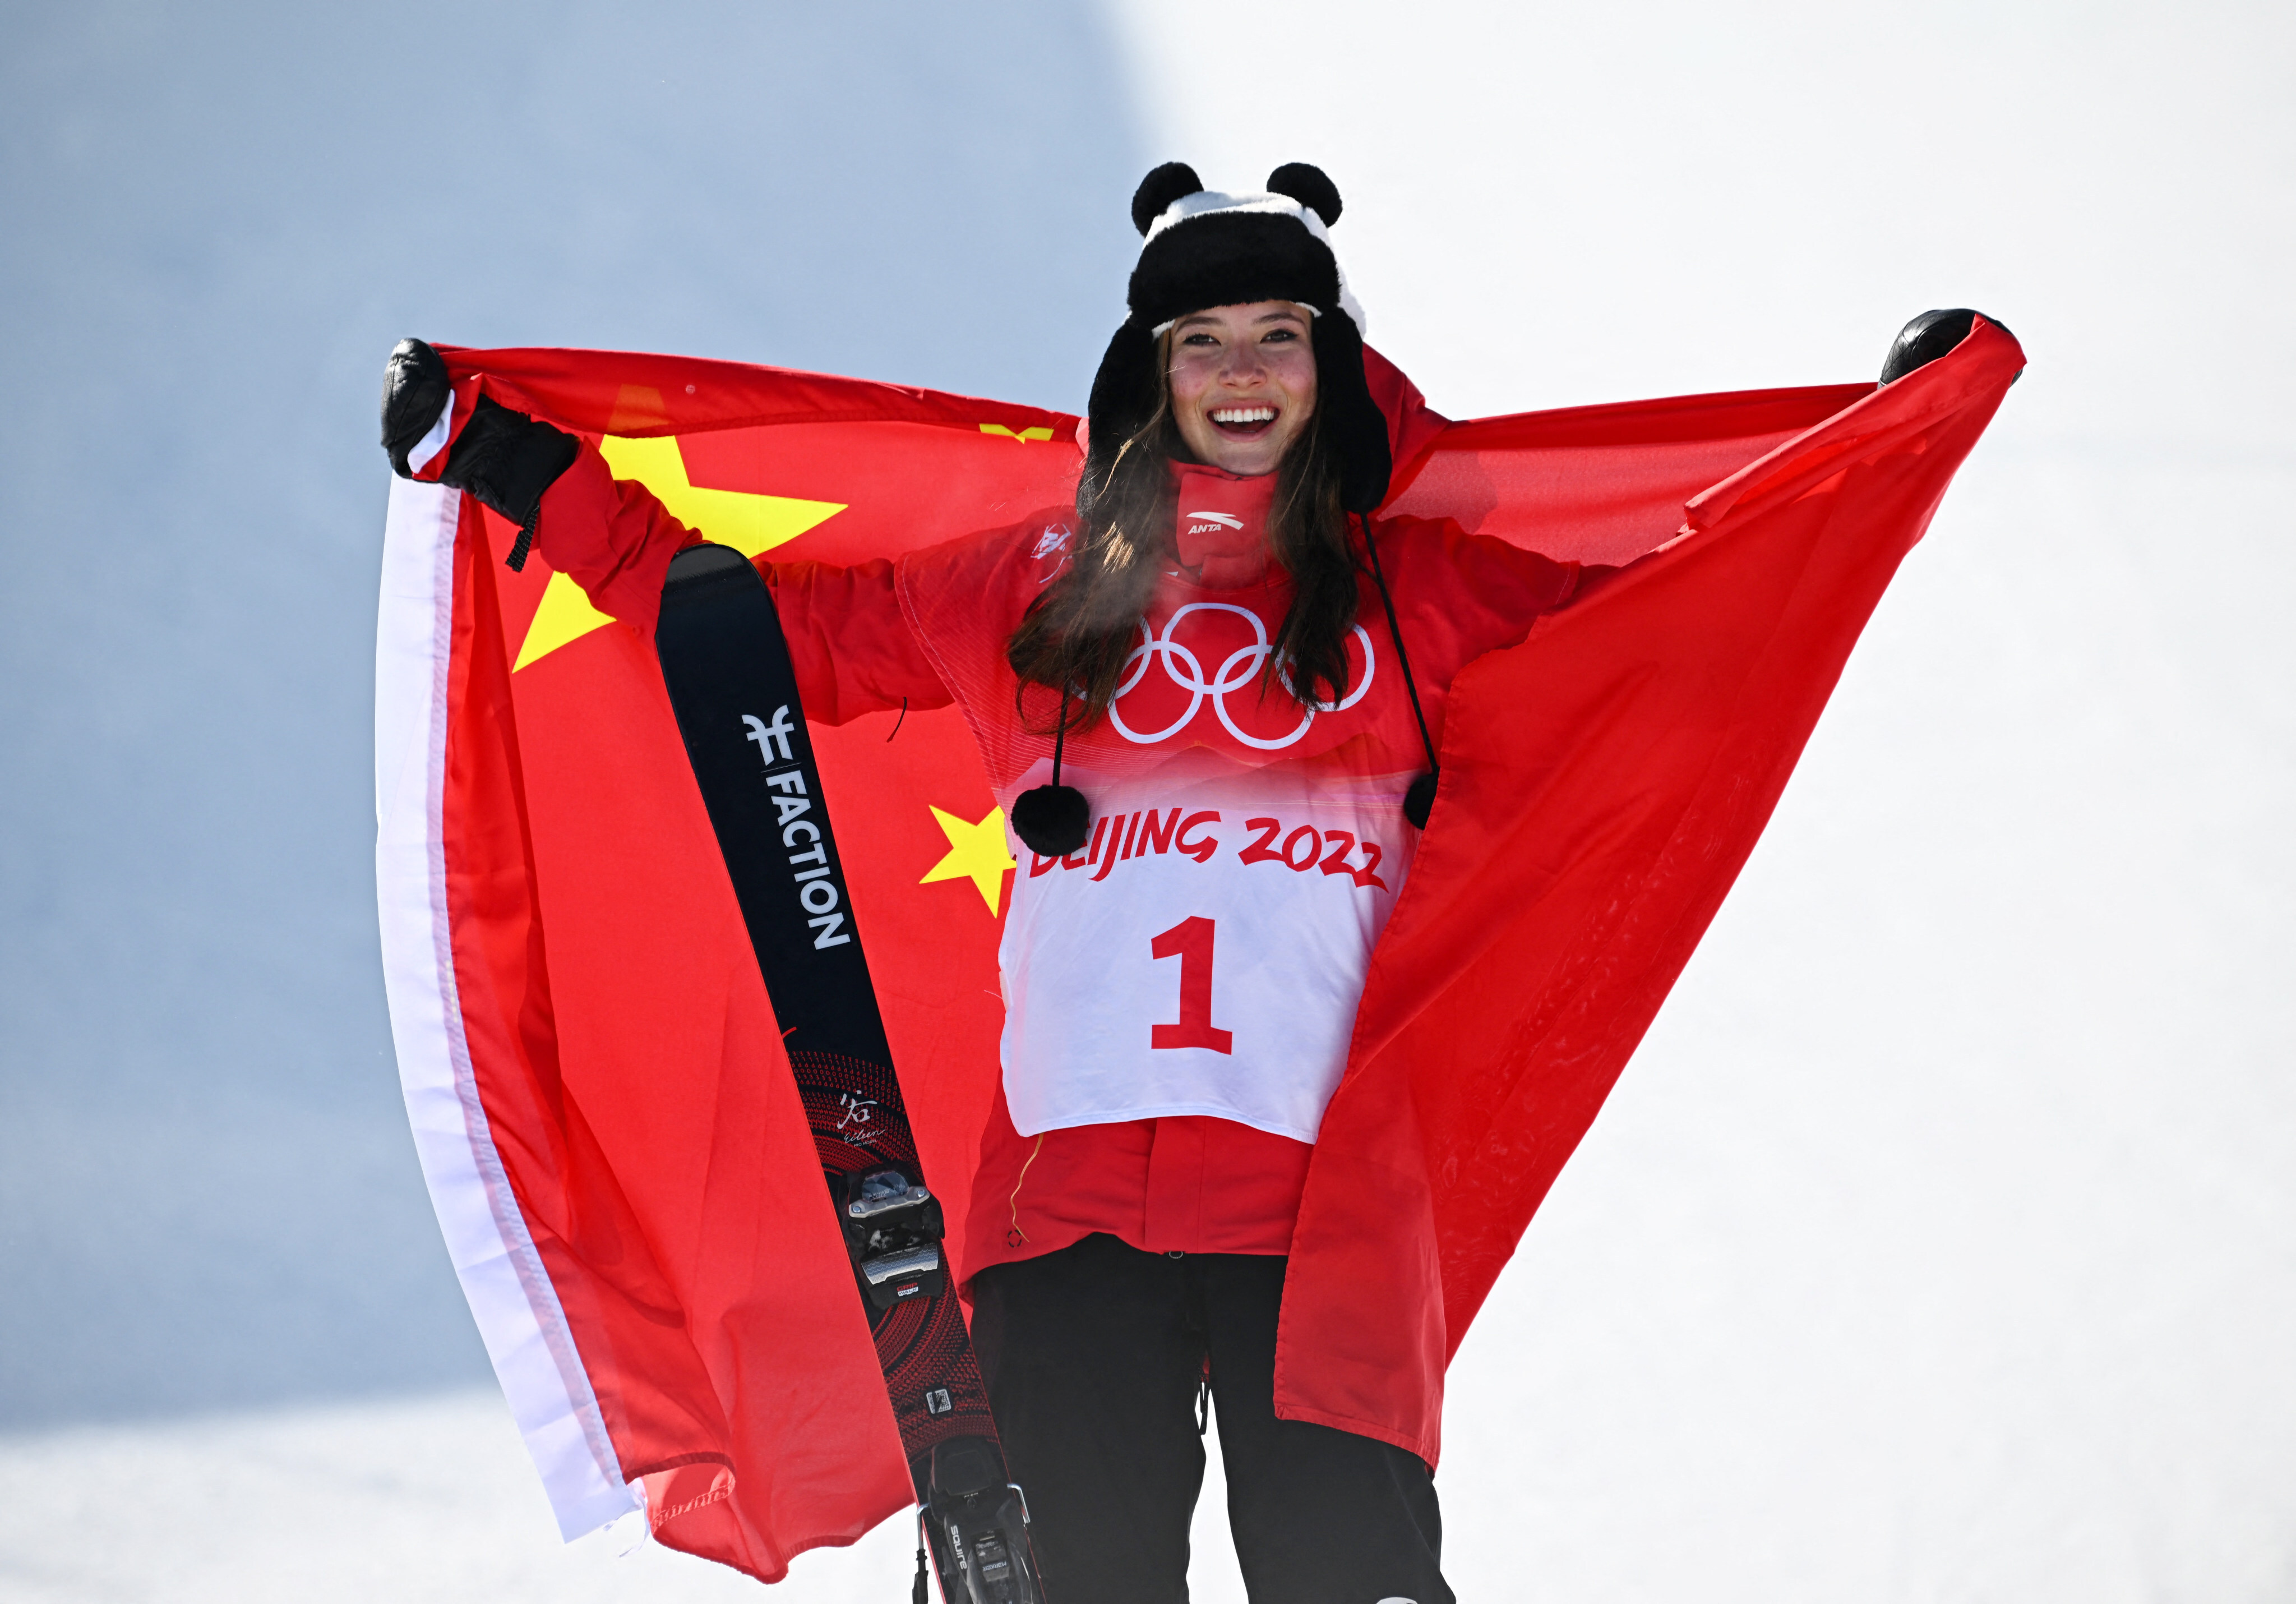 Eileen Gu, who won gold for China, will be ambassador for U.S.